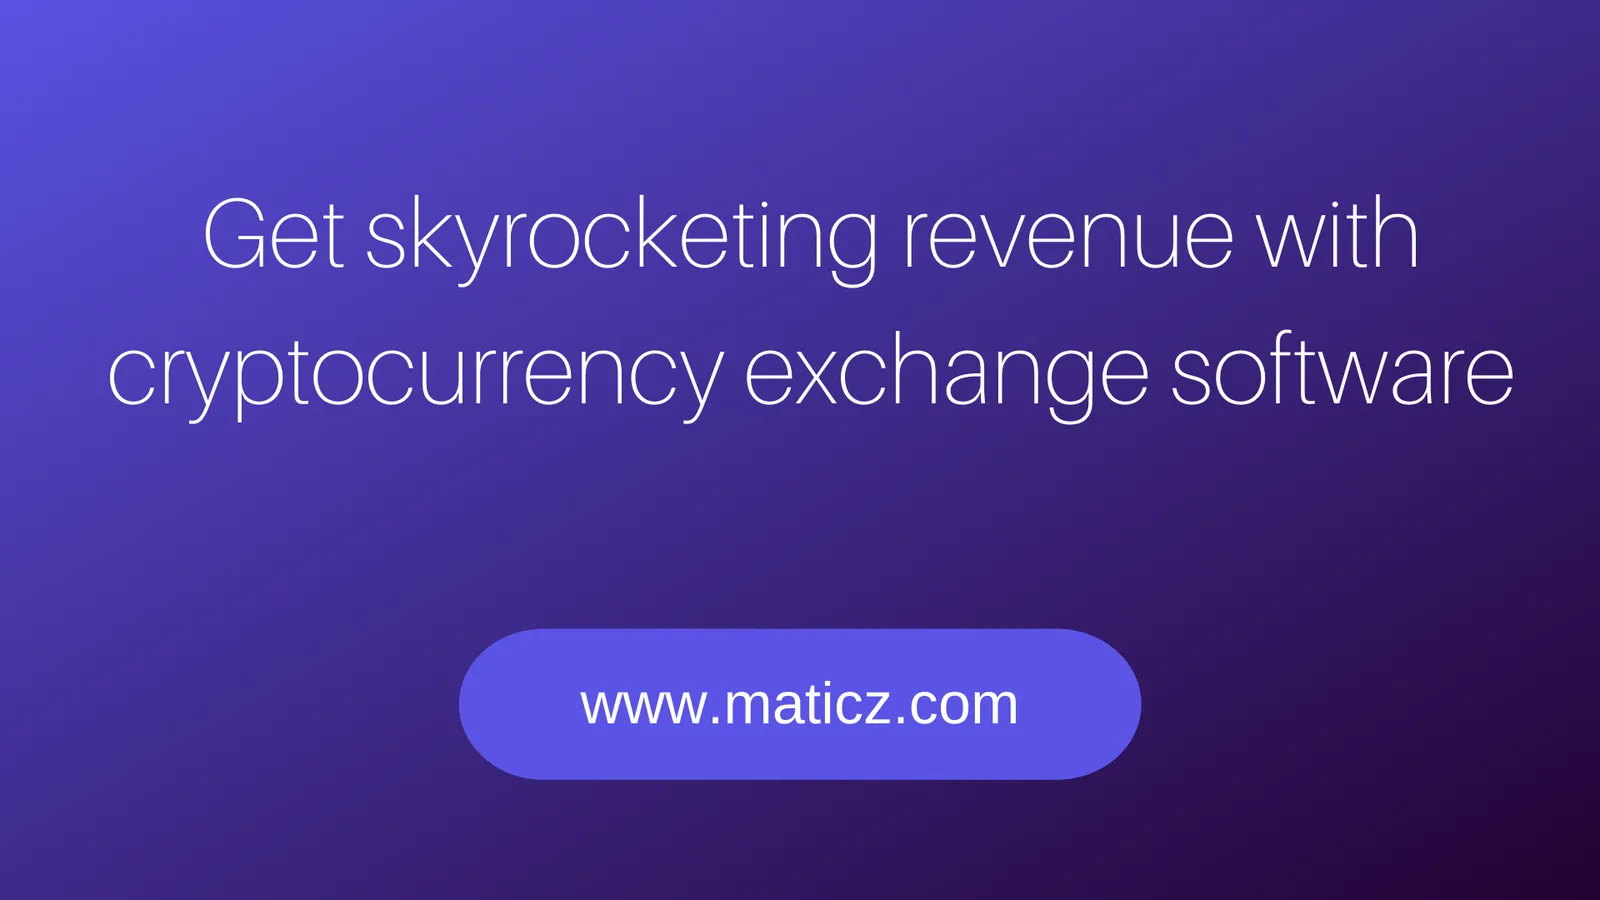 Get skyrocketing revenue with cryptocurrency exchange software